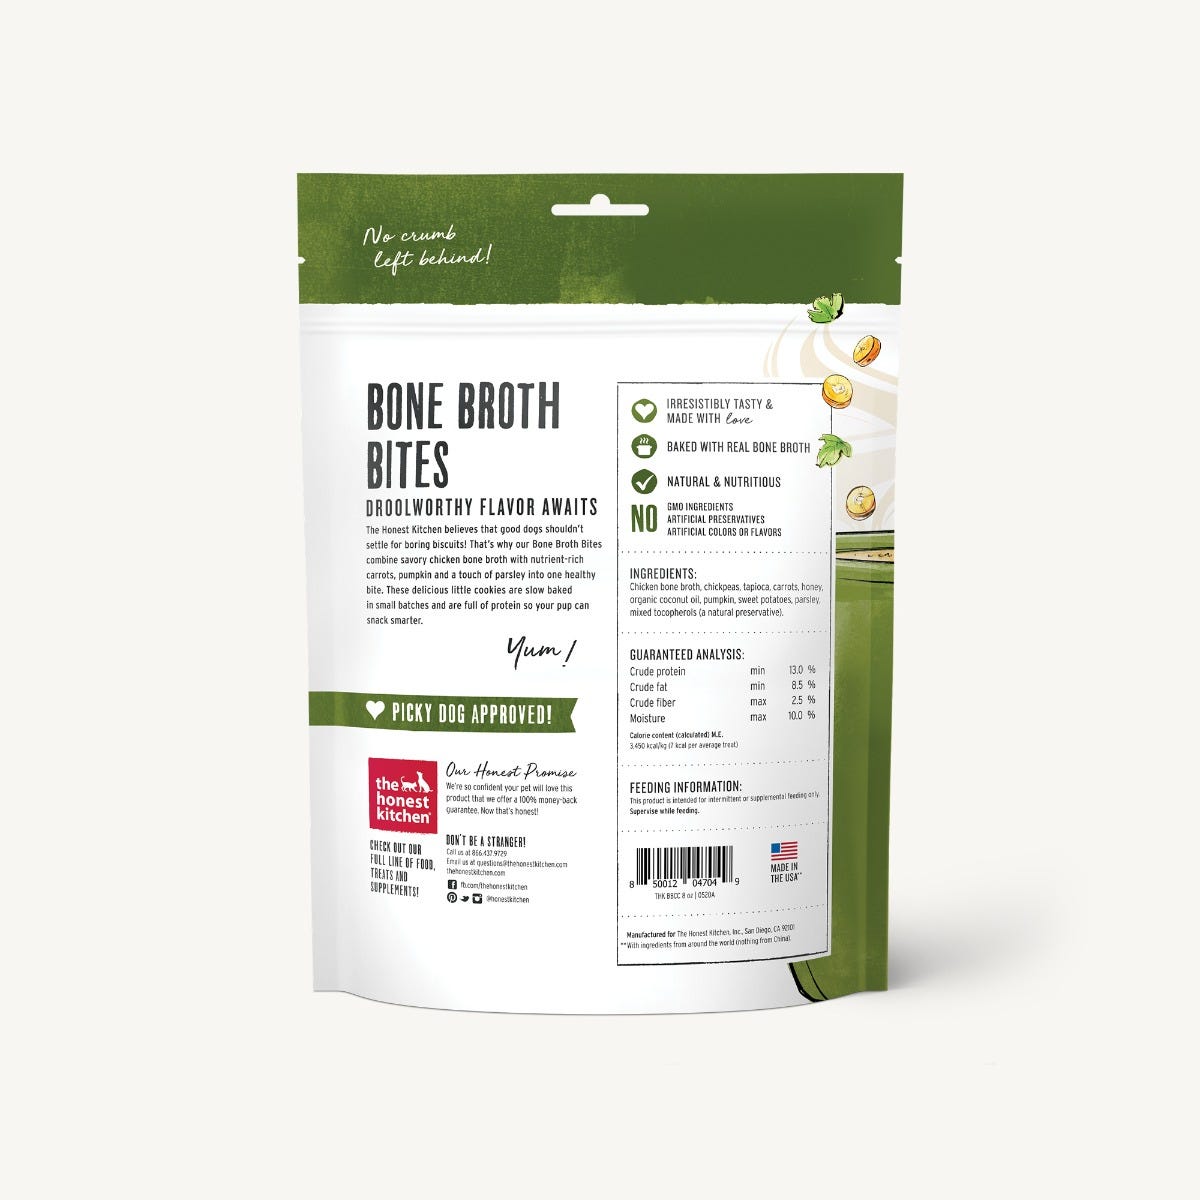 The Honest Kitchen | Bone Broth Bites | Roasted with Chicken Bone Broth & Carrots Treats | ARMOR THE POOCH